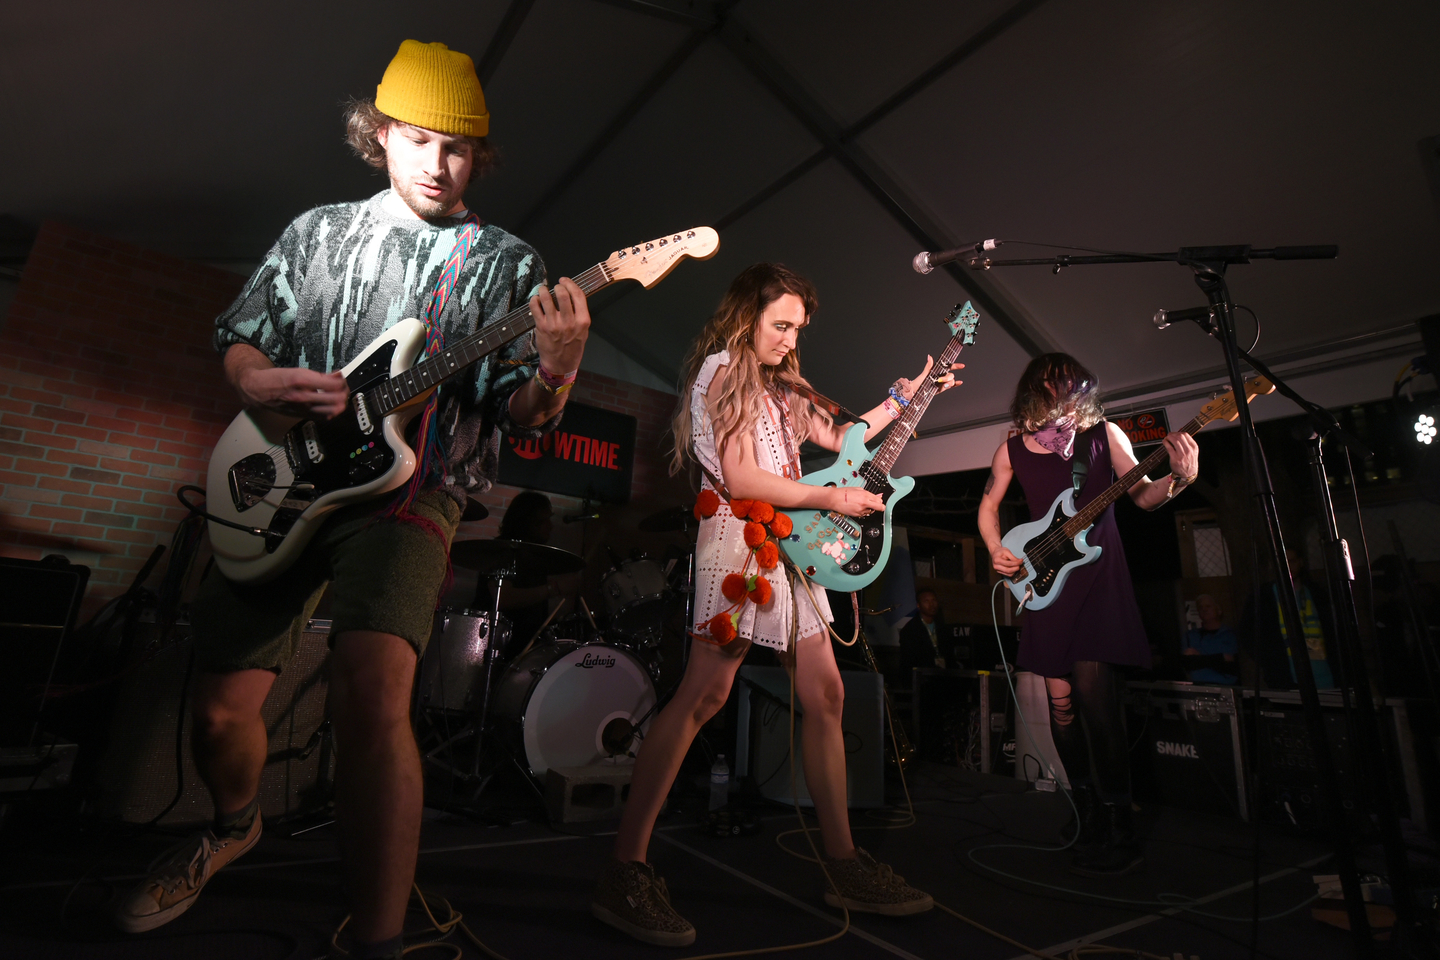 Speedy Ortiz was at the The Showtime House at Clive Bar. Photo by Dave Pedley/Getty Images for SXSW